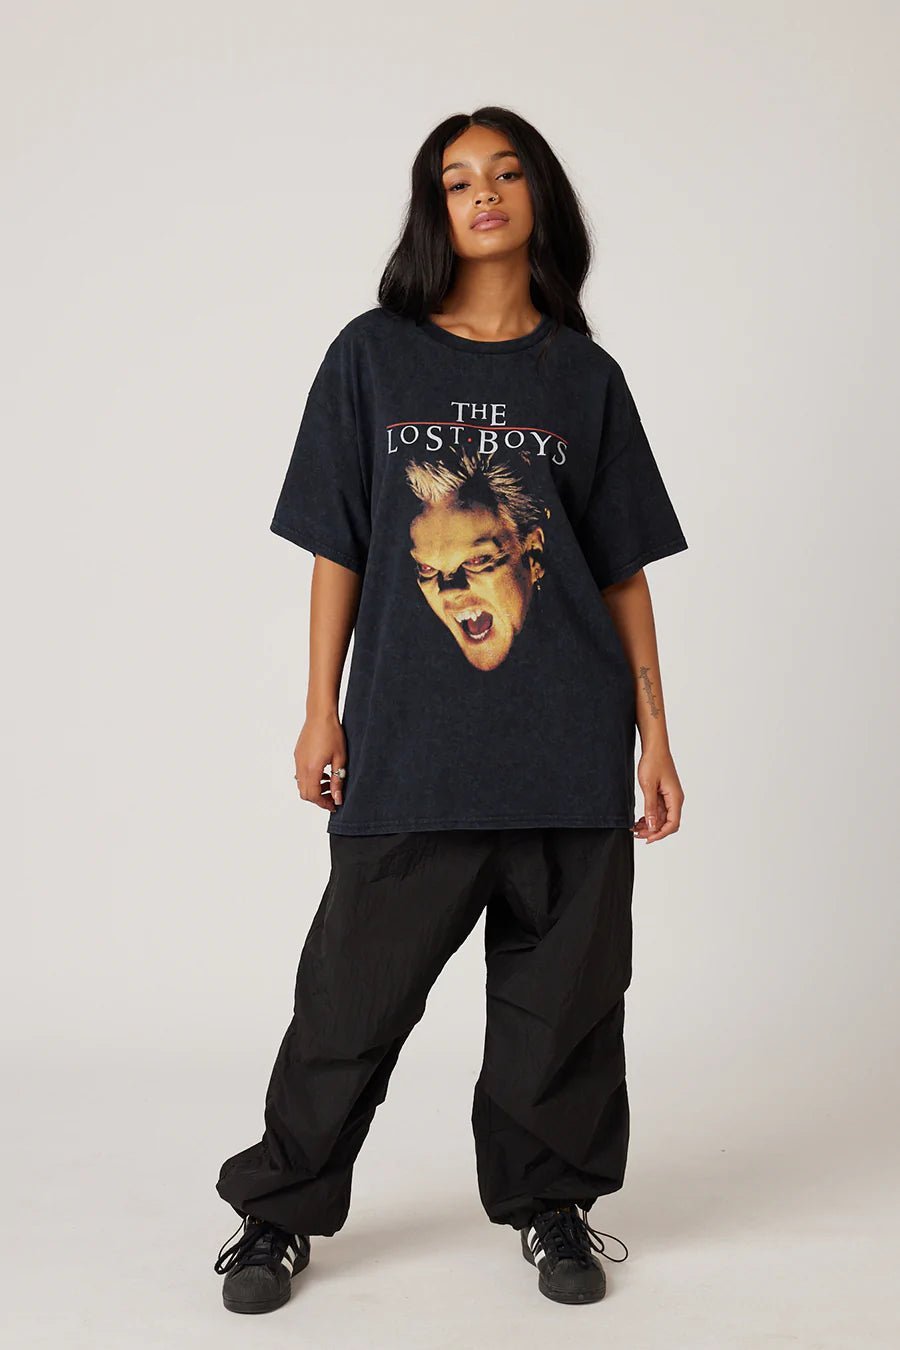 Shop New Girl Order The Lost Boys Washed Tee - Premium T-Shirt from New Girl Order Online now at Spoiled Brat 